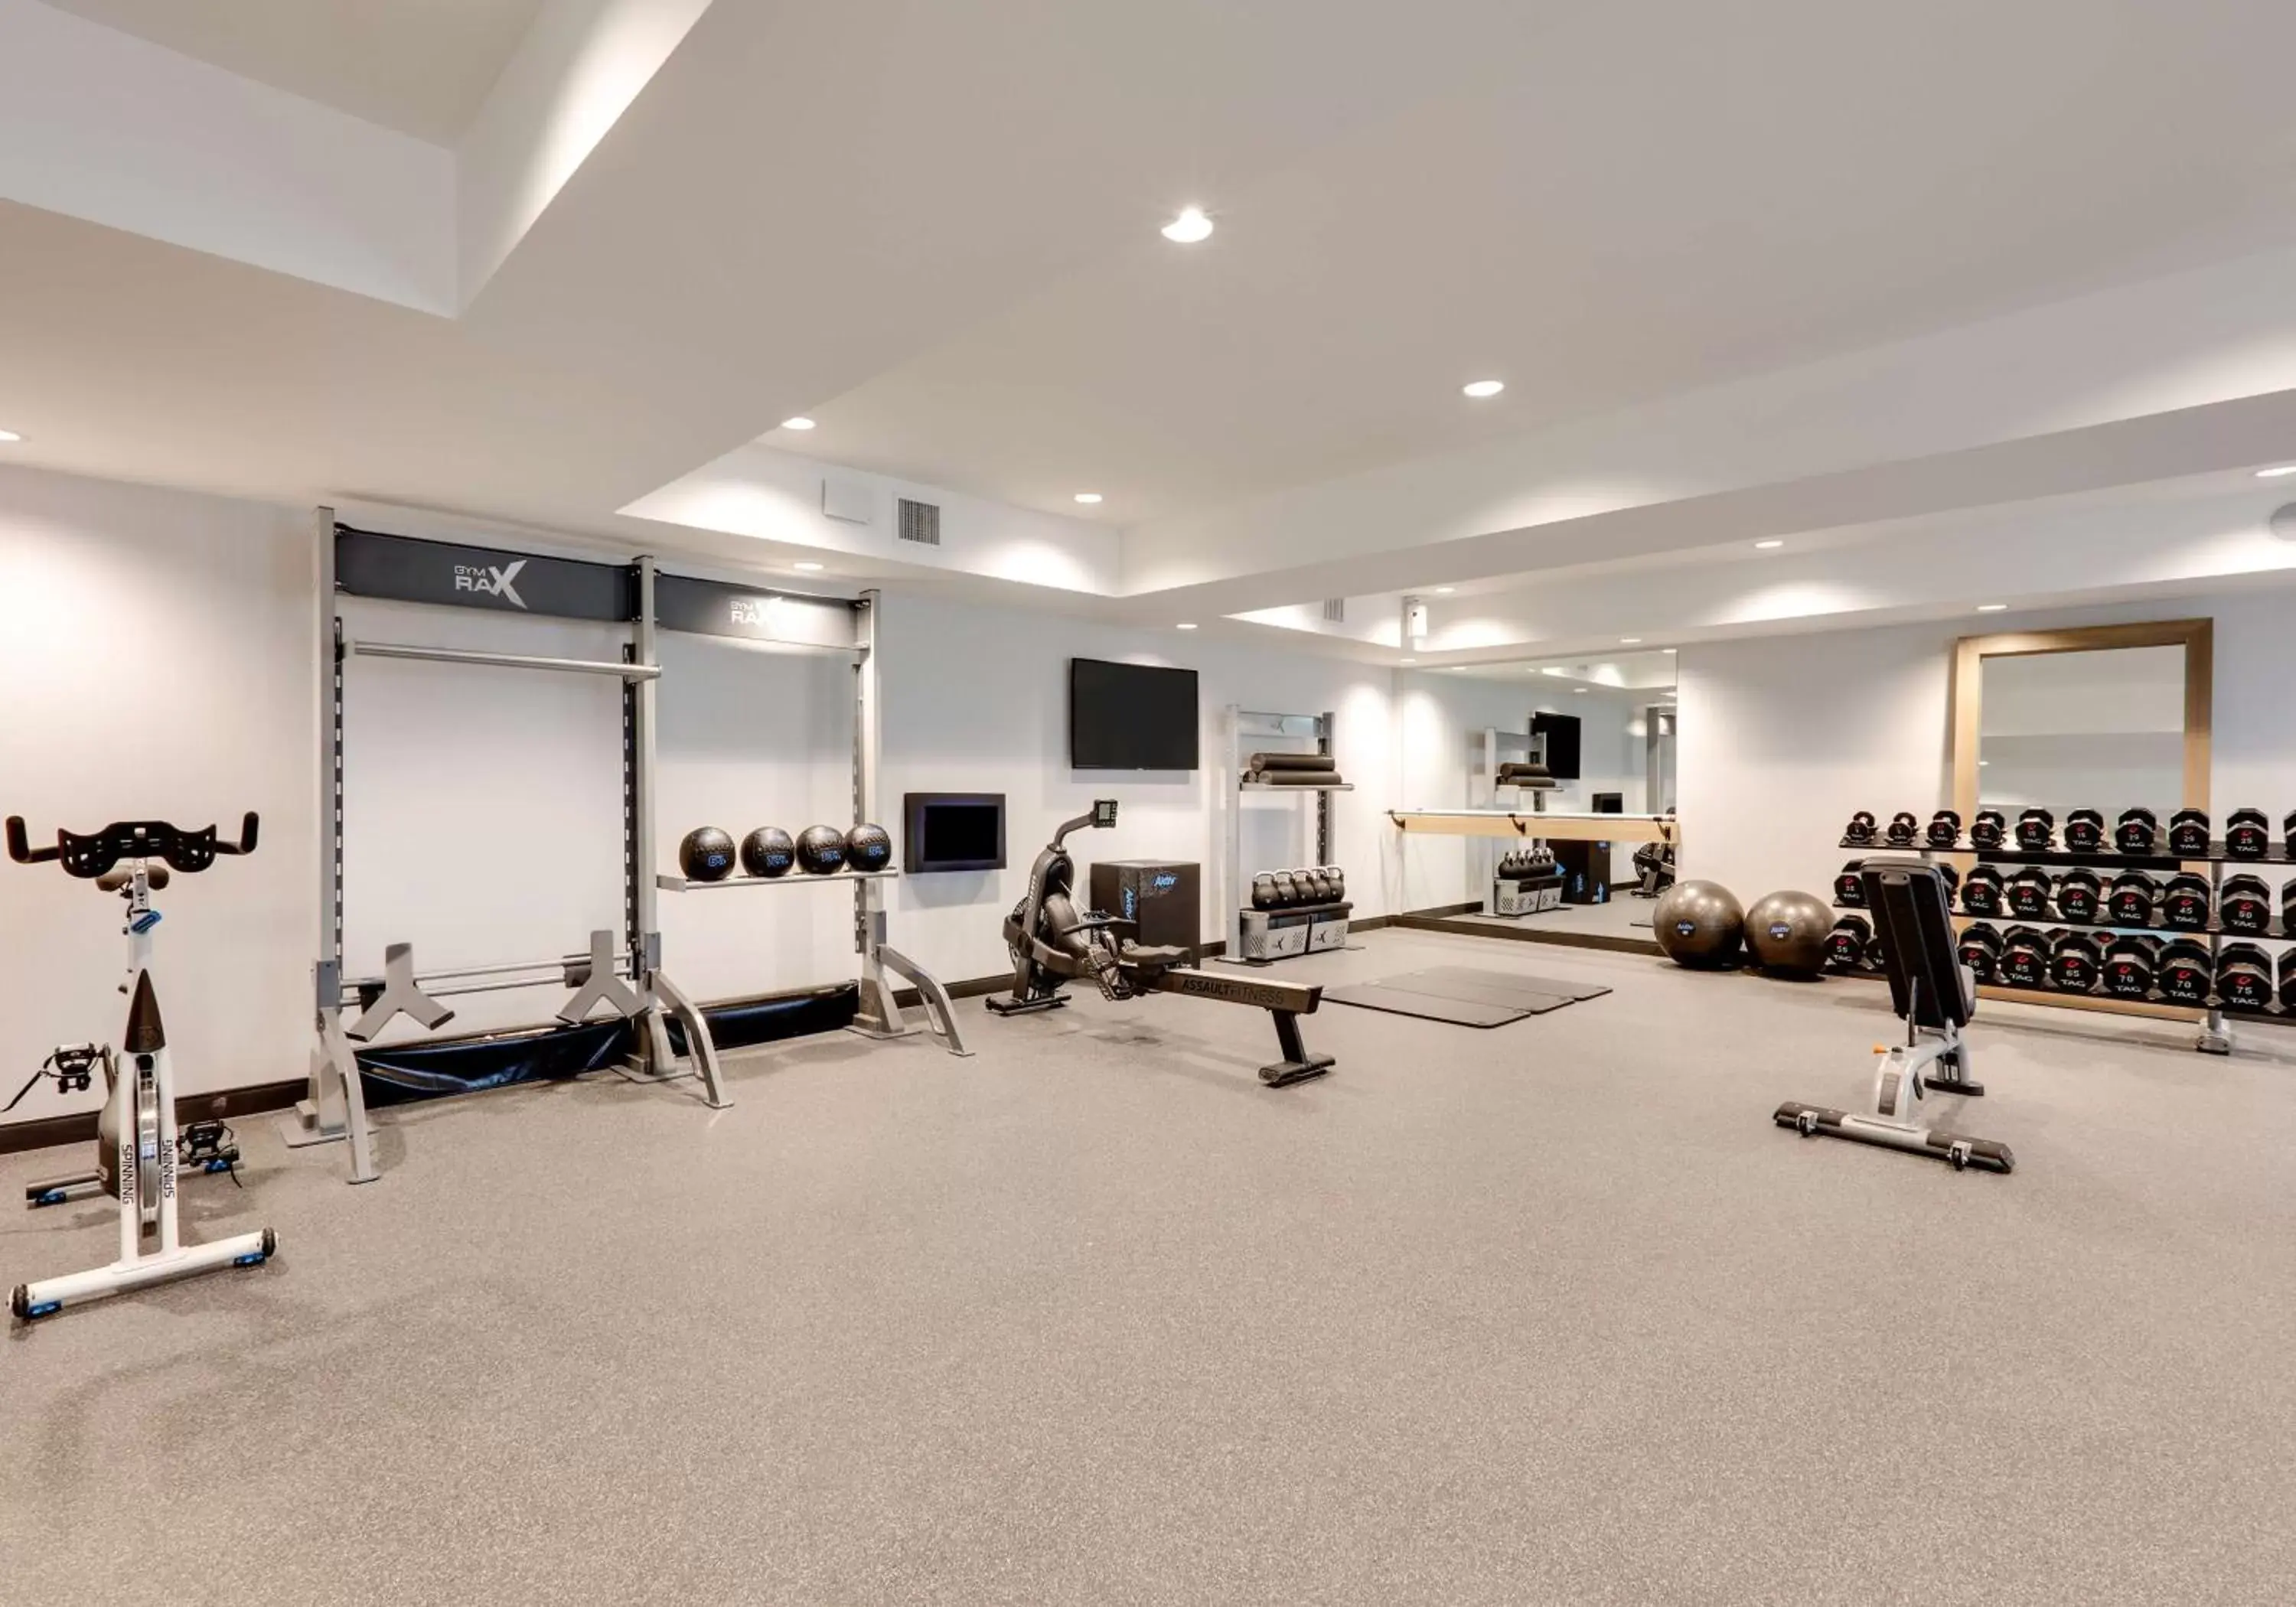 Fitness centre/facilities, Fitness Center/Facilities in Tru By Hilton Euless Dfw West, Tx